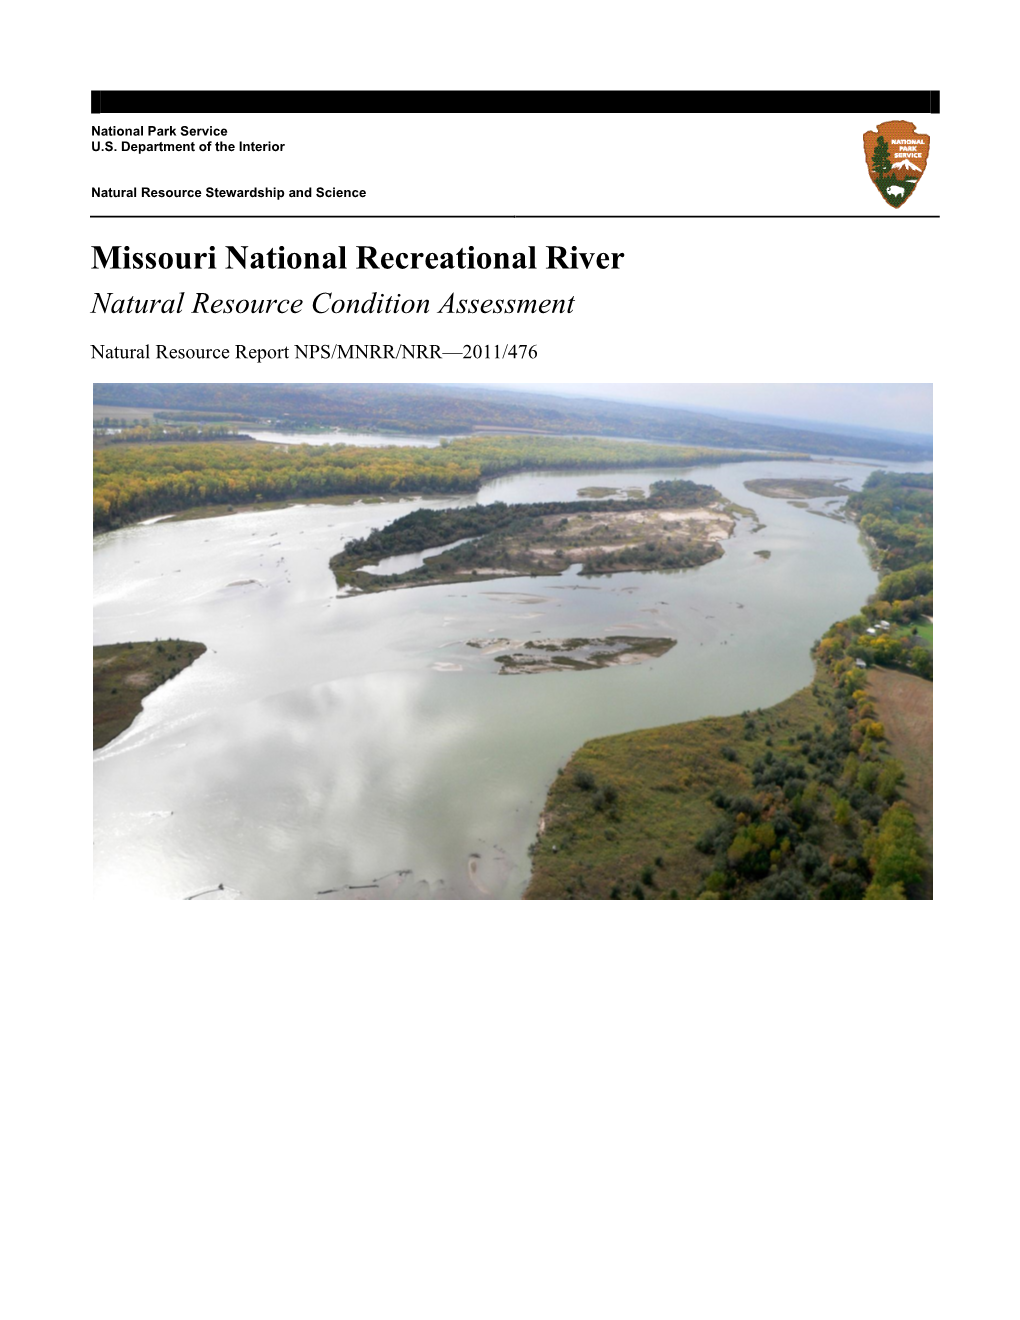 Natural Resource Condition Assessment, Missouri National